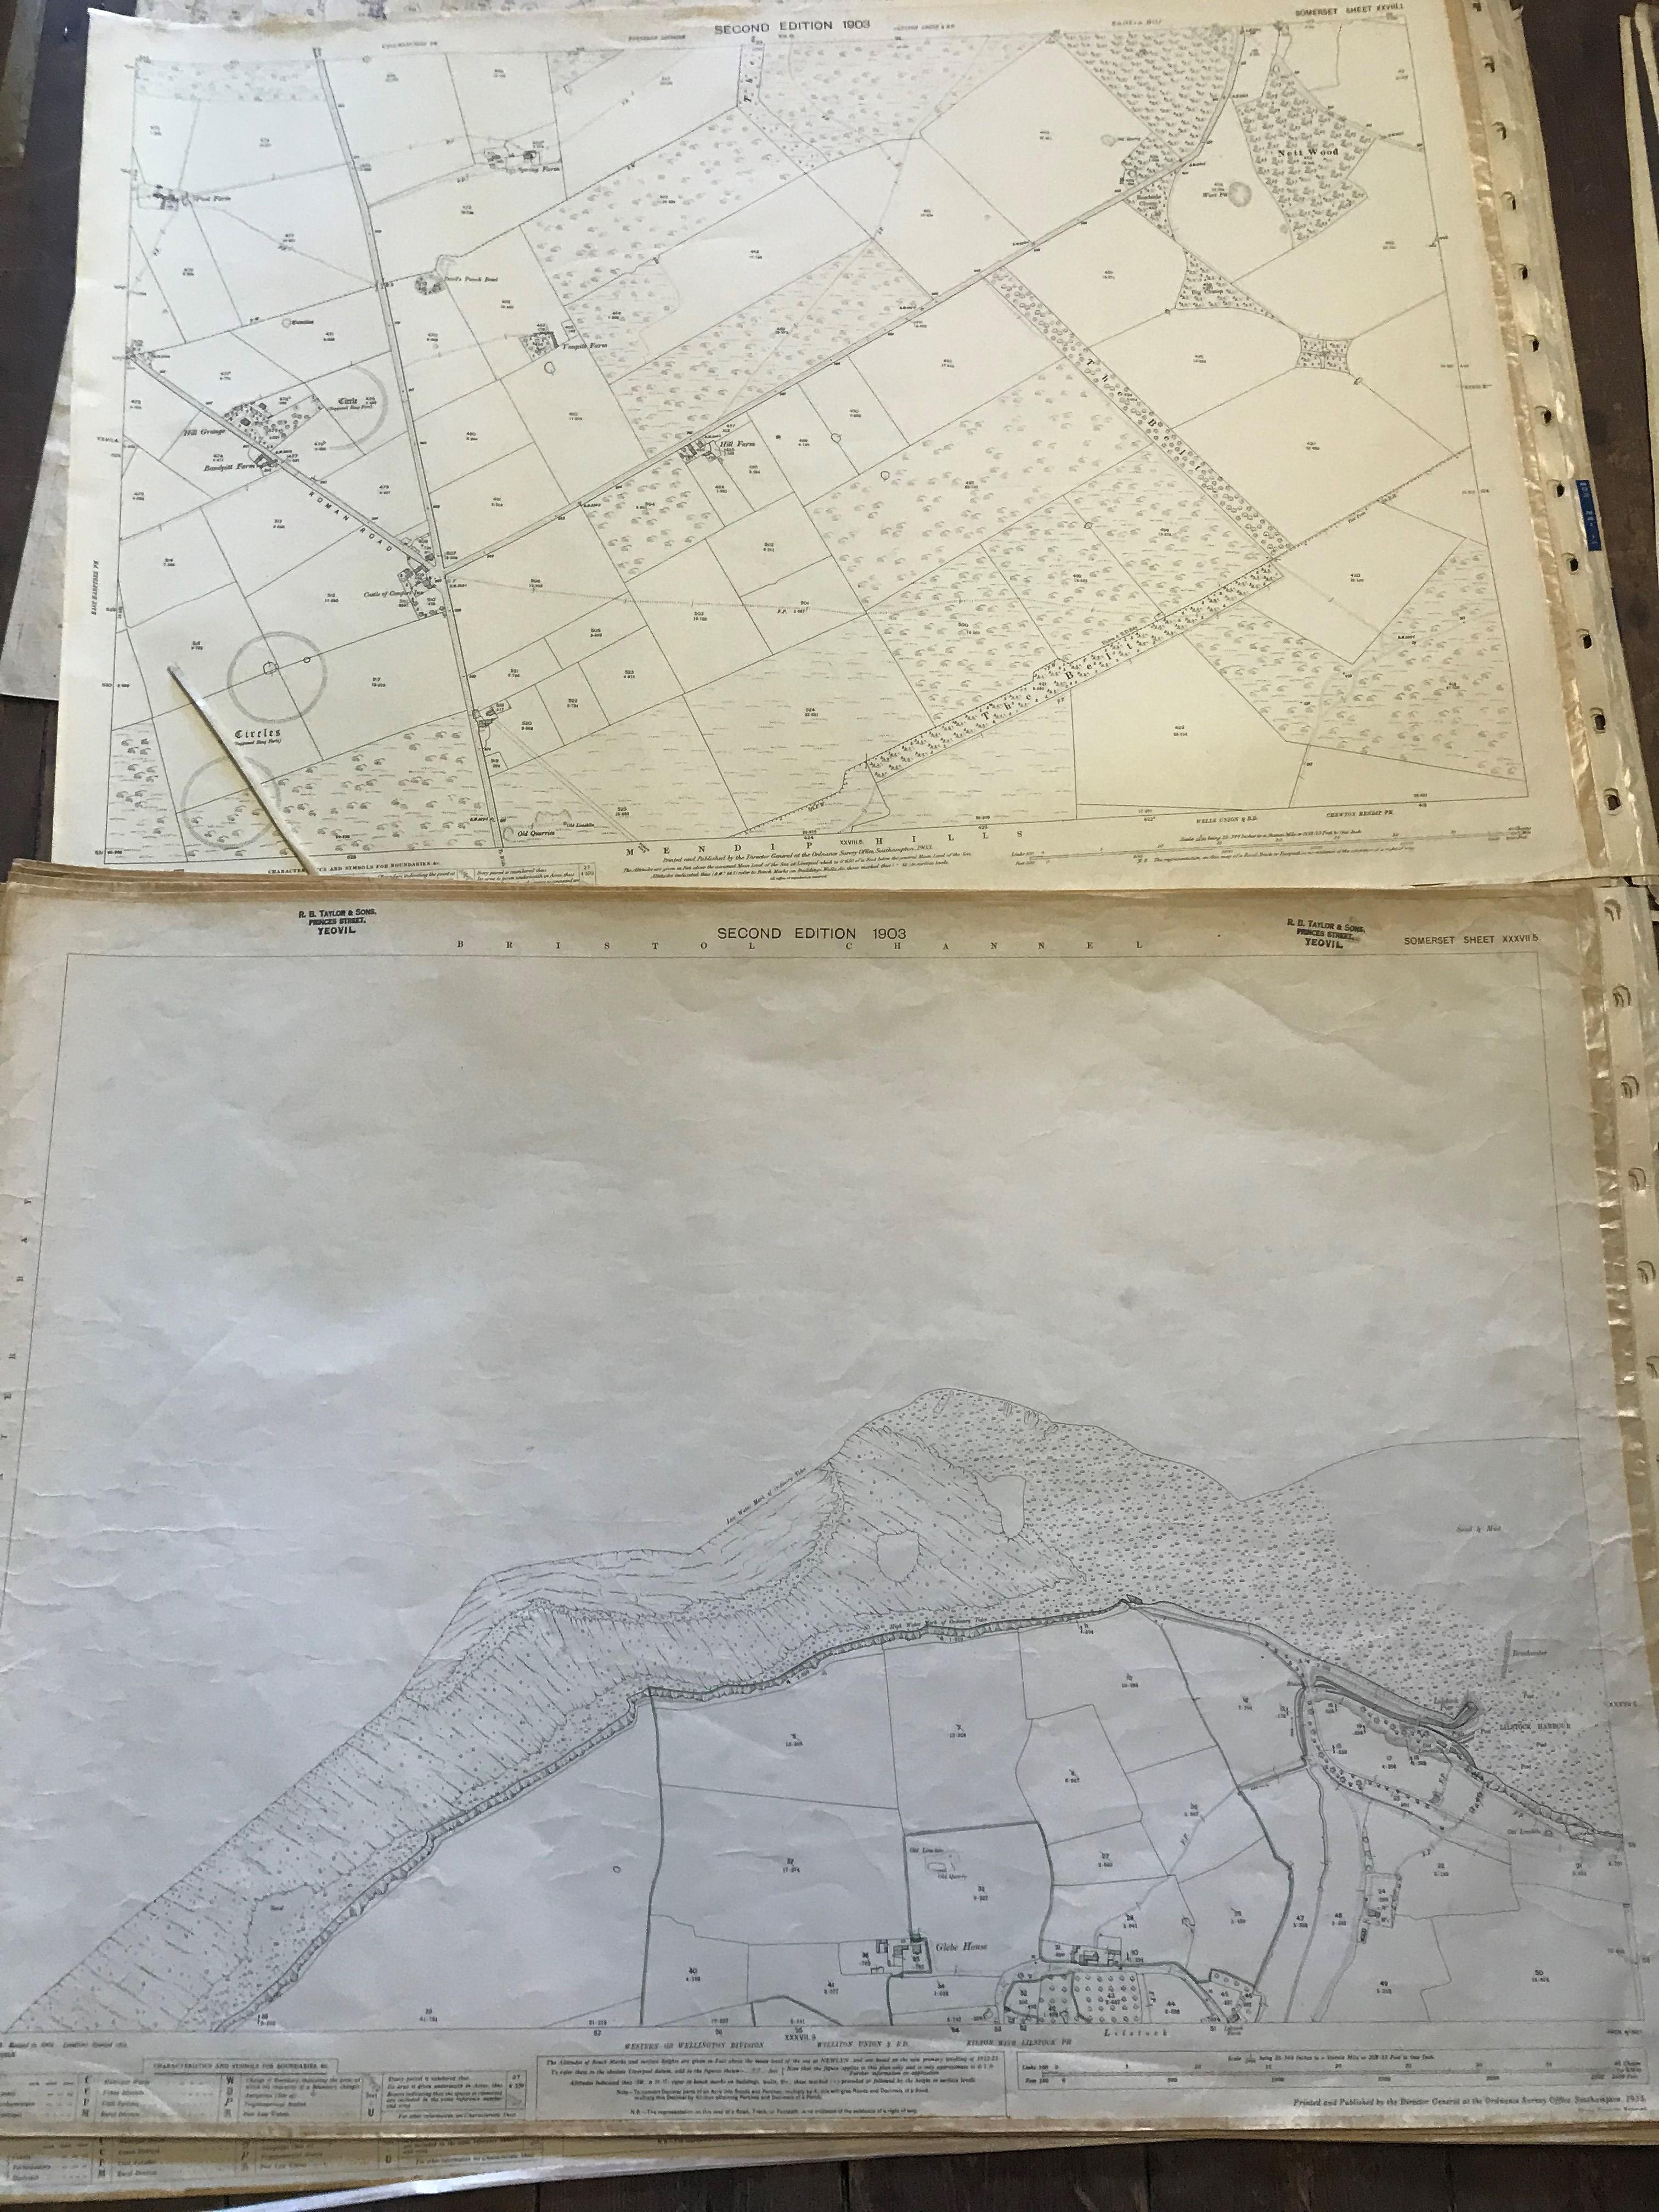 COLLECTION OF THIRTY 1:2500 ORDNANCE SURVEY MAPS covering Upper and Lower Westholme; Chewton Mendip; - Image 12 of 13